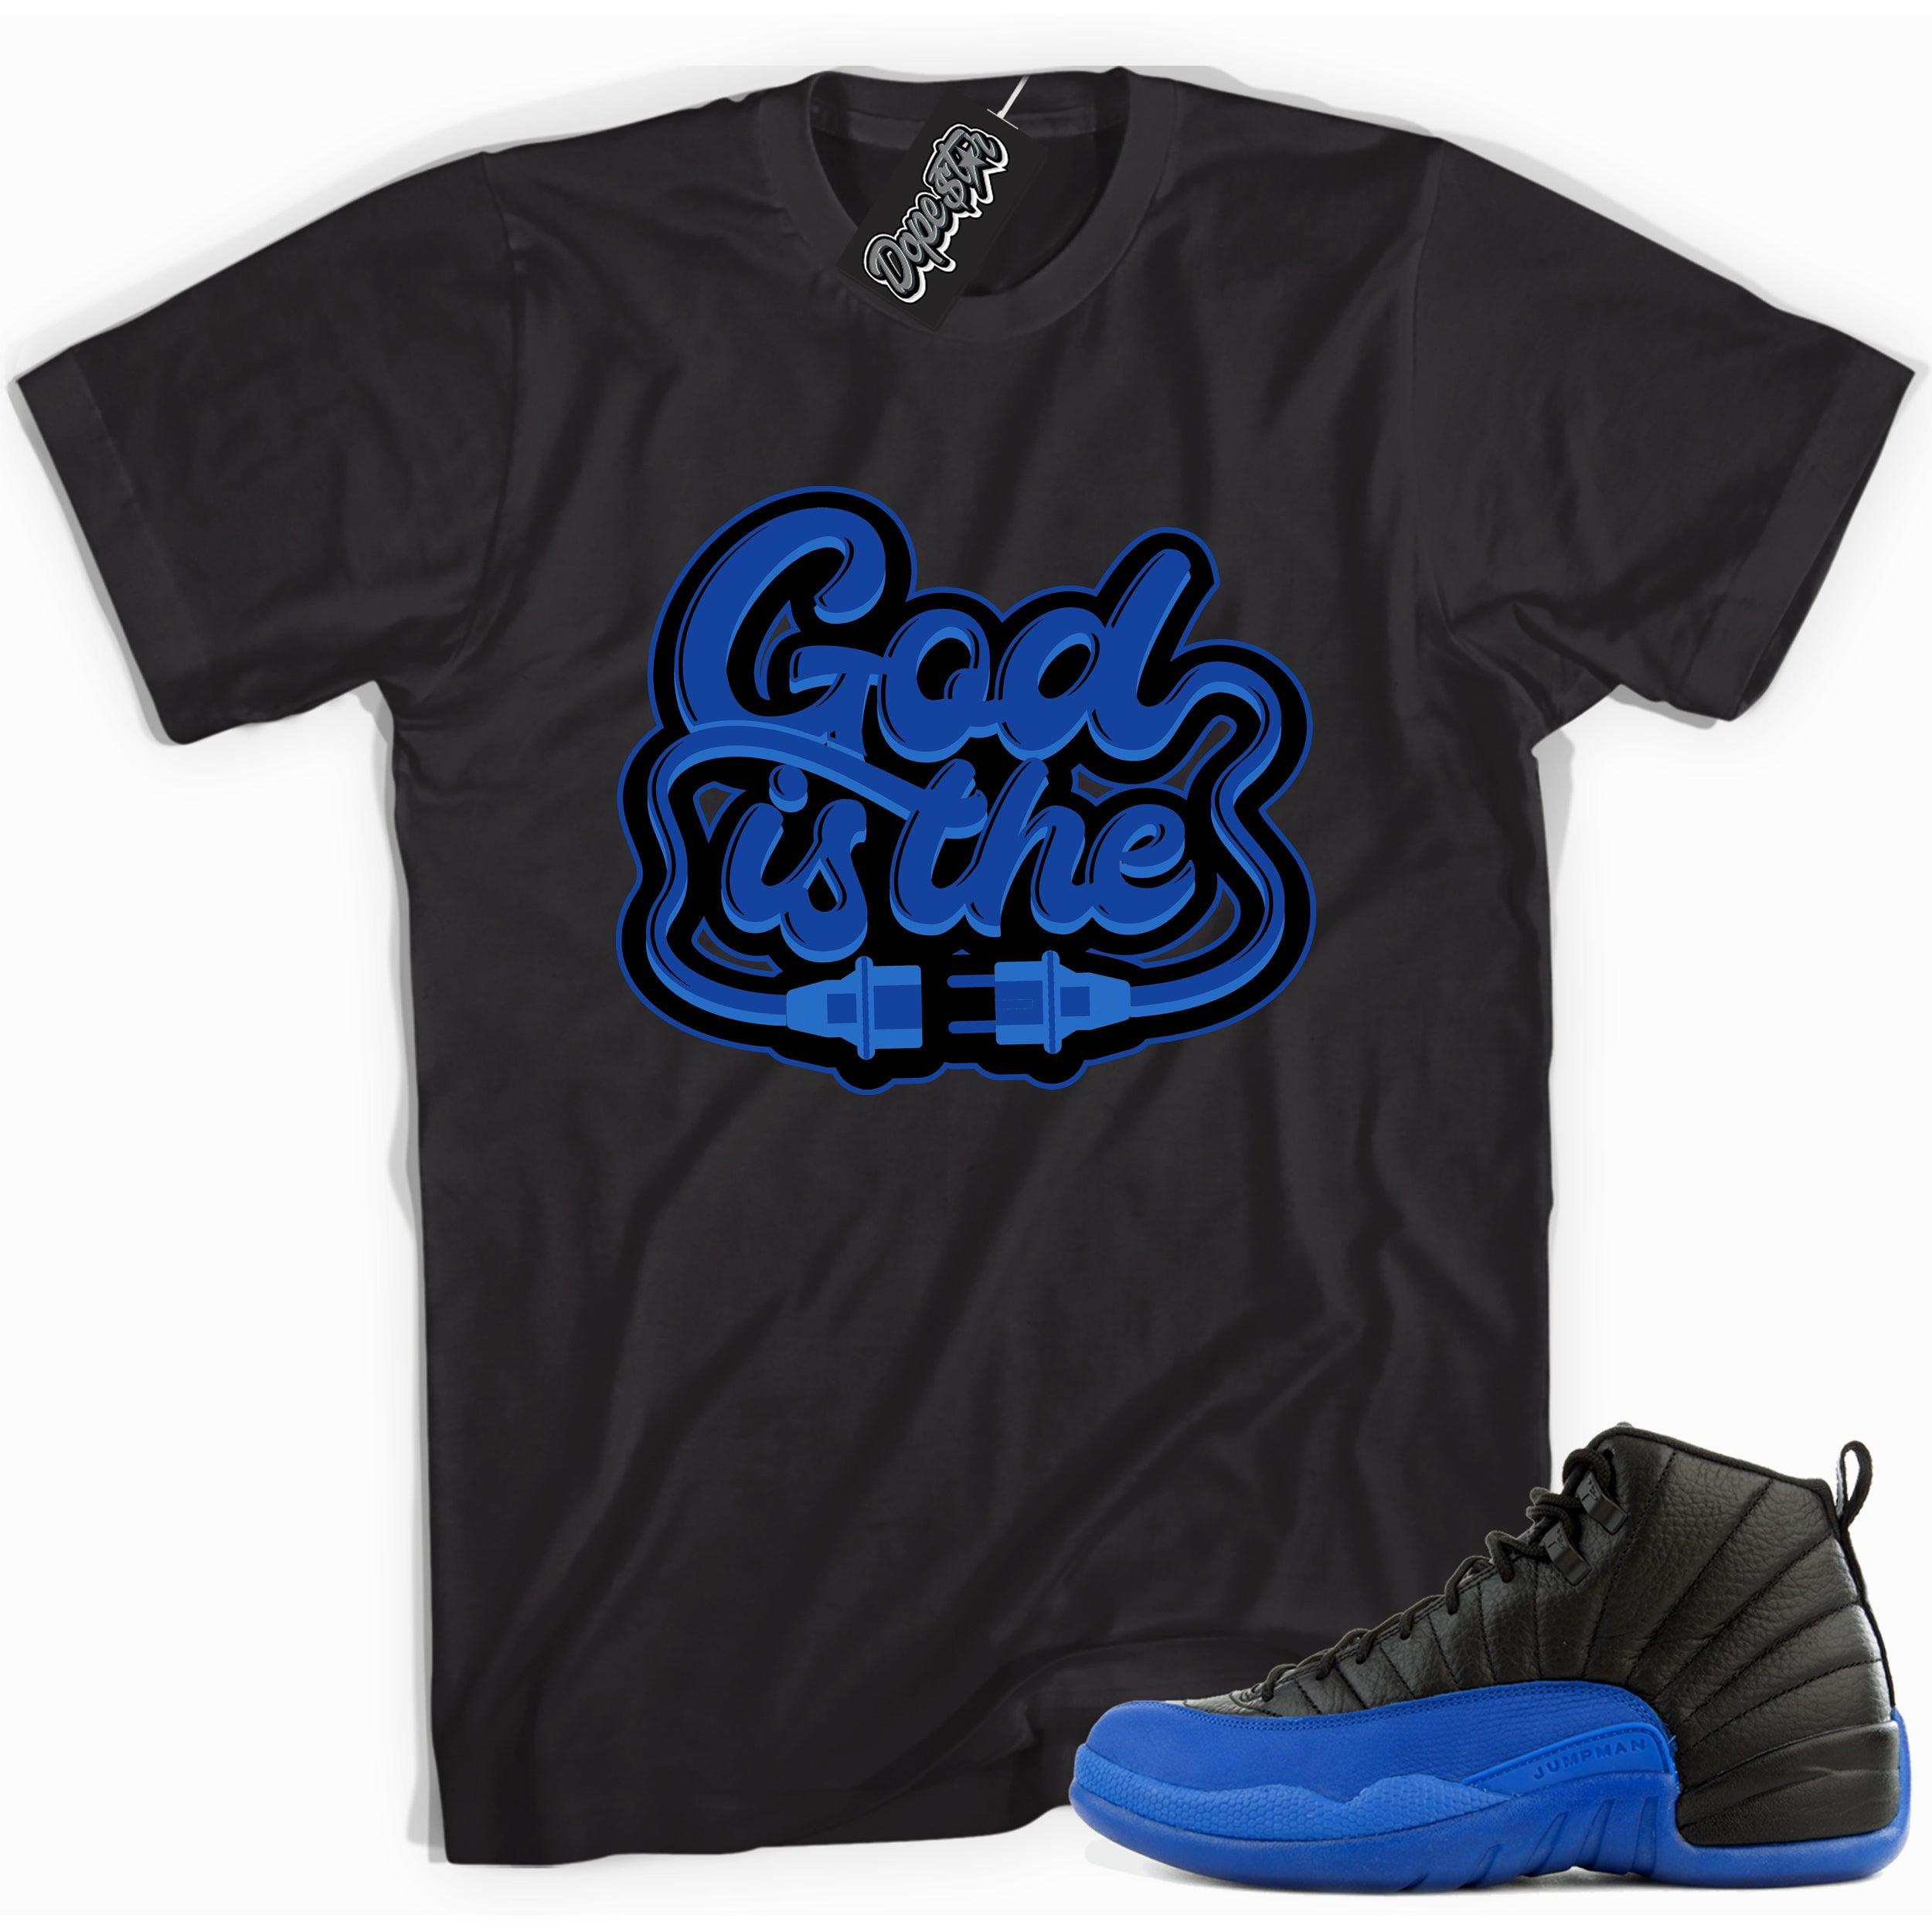 Cool black graphic tee with 'god is the plug' print, that perfectly matches  Air Jordan 12 Retro Black Game Royal sneakers.